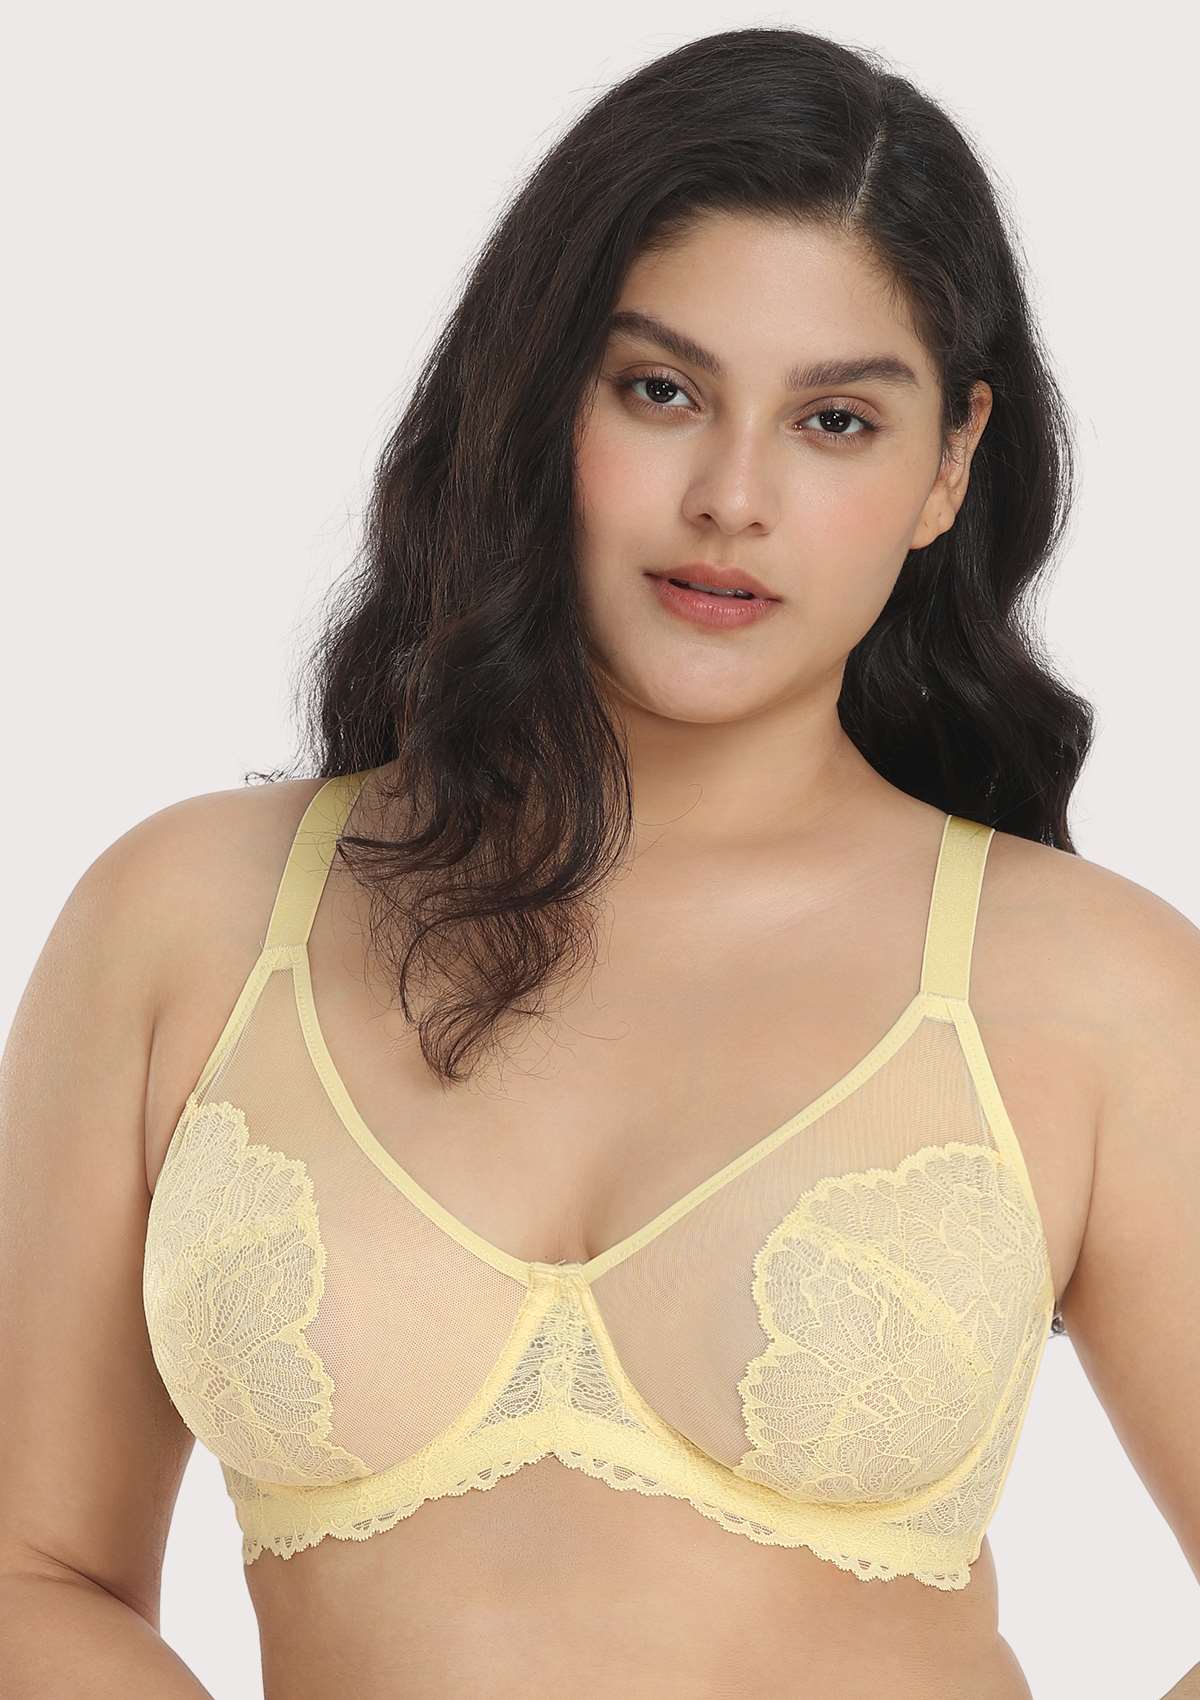 HSIA Blossom Full Coverage Side Support Bra: Designed For Heavy Busts - Beige / 46 / DDD/F